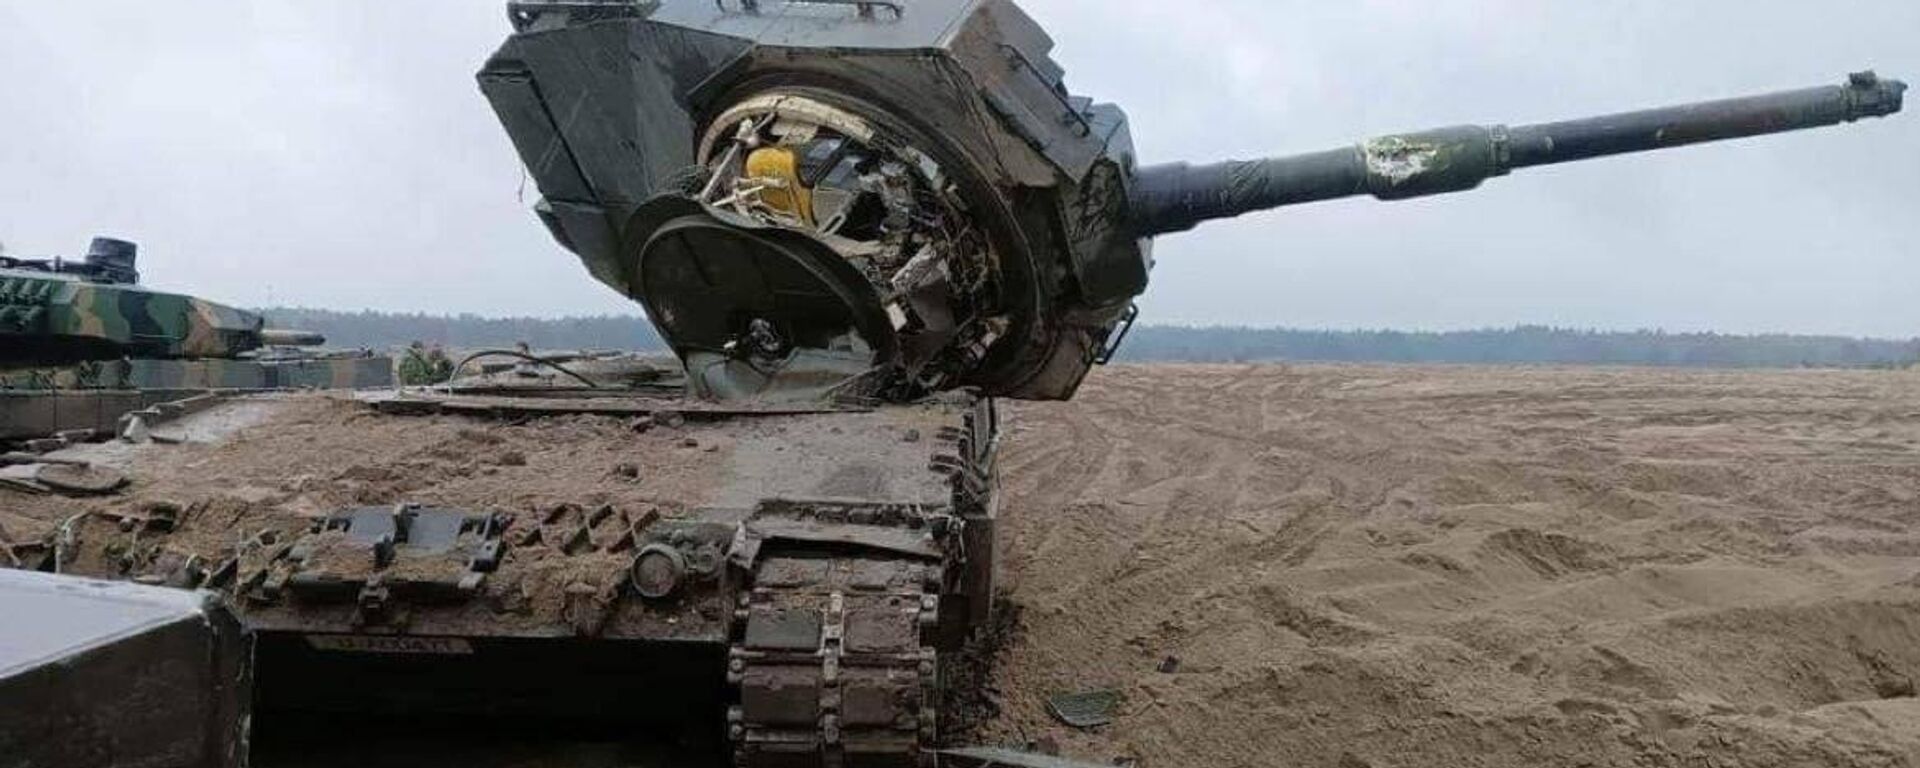 Leopard 2 with its turret ripped off after an accident during training by Ukrainian tankers in western Poland.  - اسپوتنیک افغانستان  , 1920, 22.09.2023